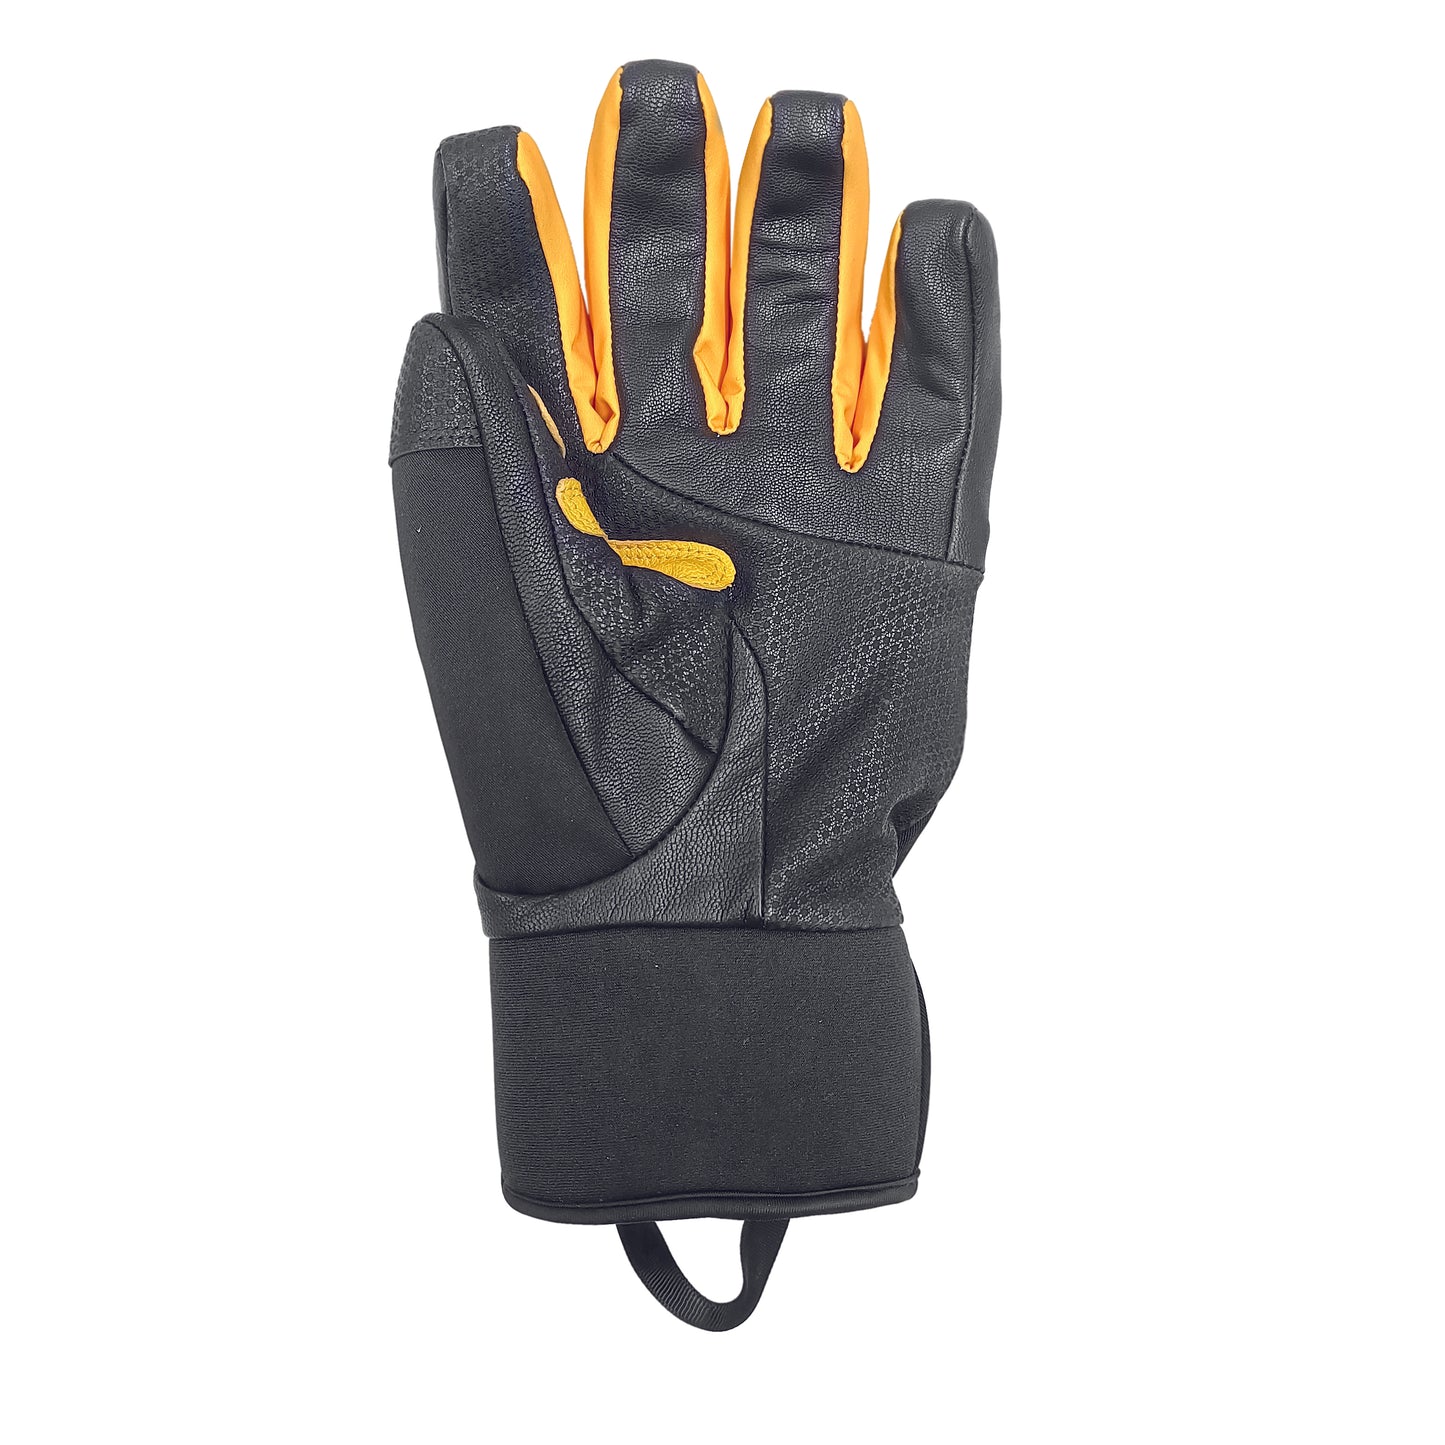 Supercouloir Insulated Gloves Black/Yellow